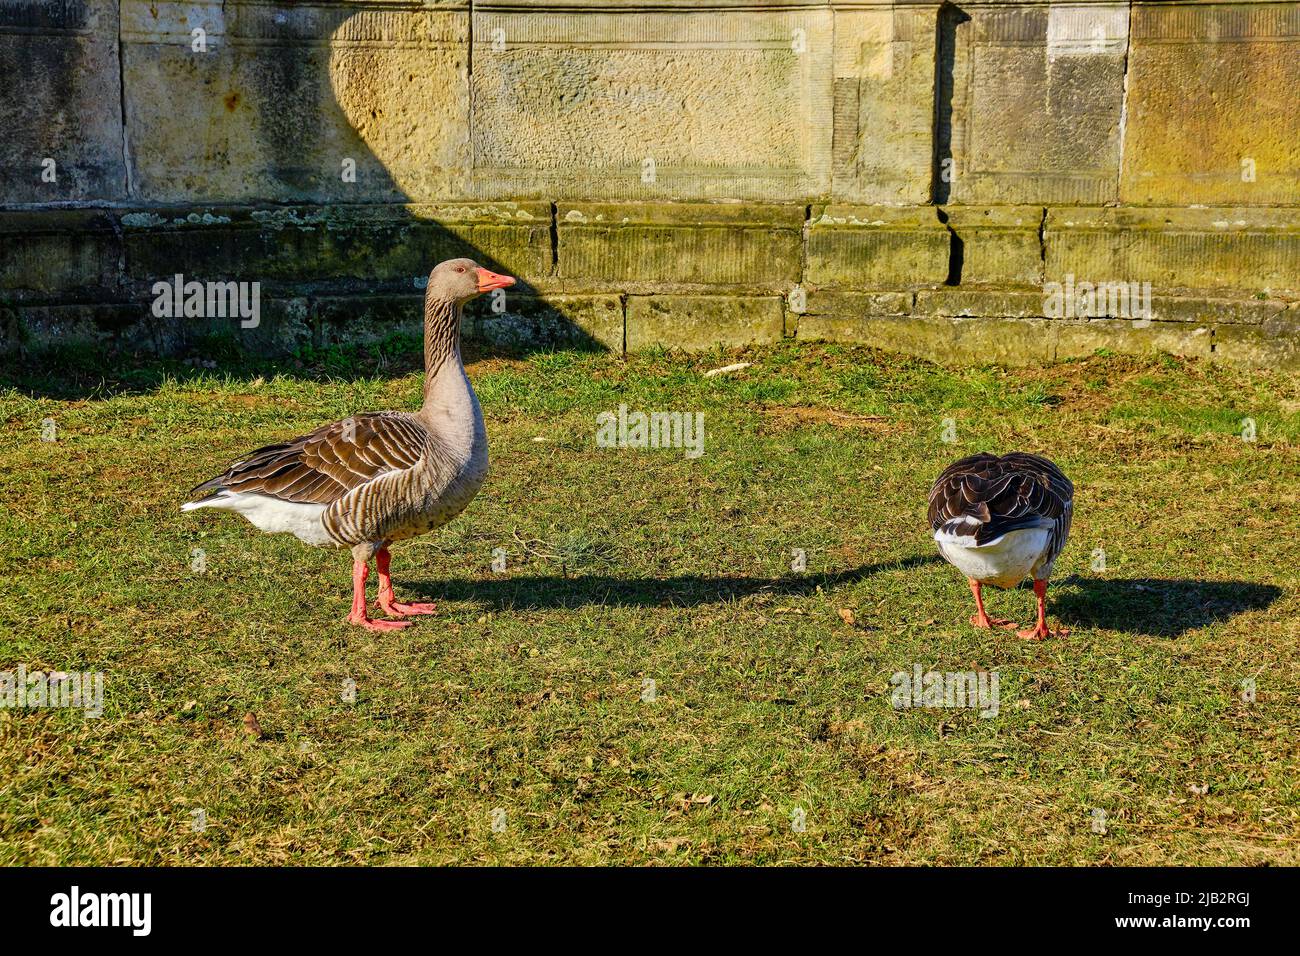 Greylag geese waddle in a meadow in front of a Baroque stone structure in search of food. Stock Photo